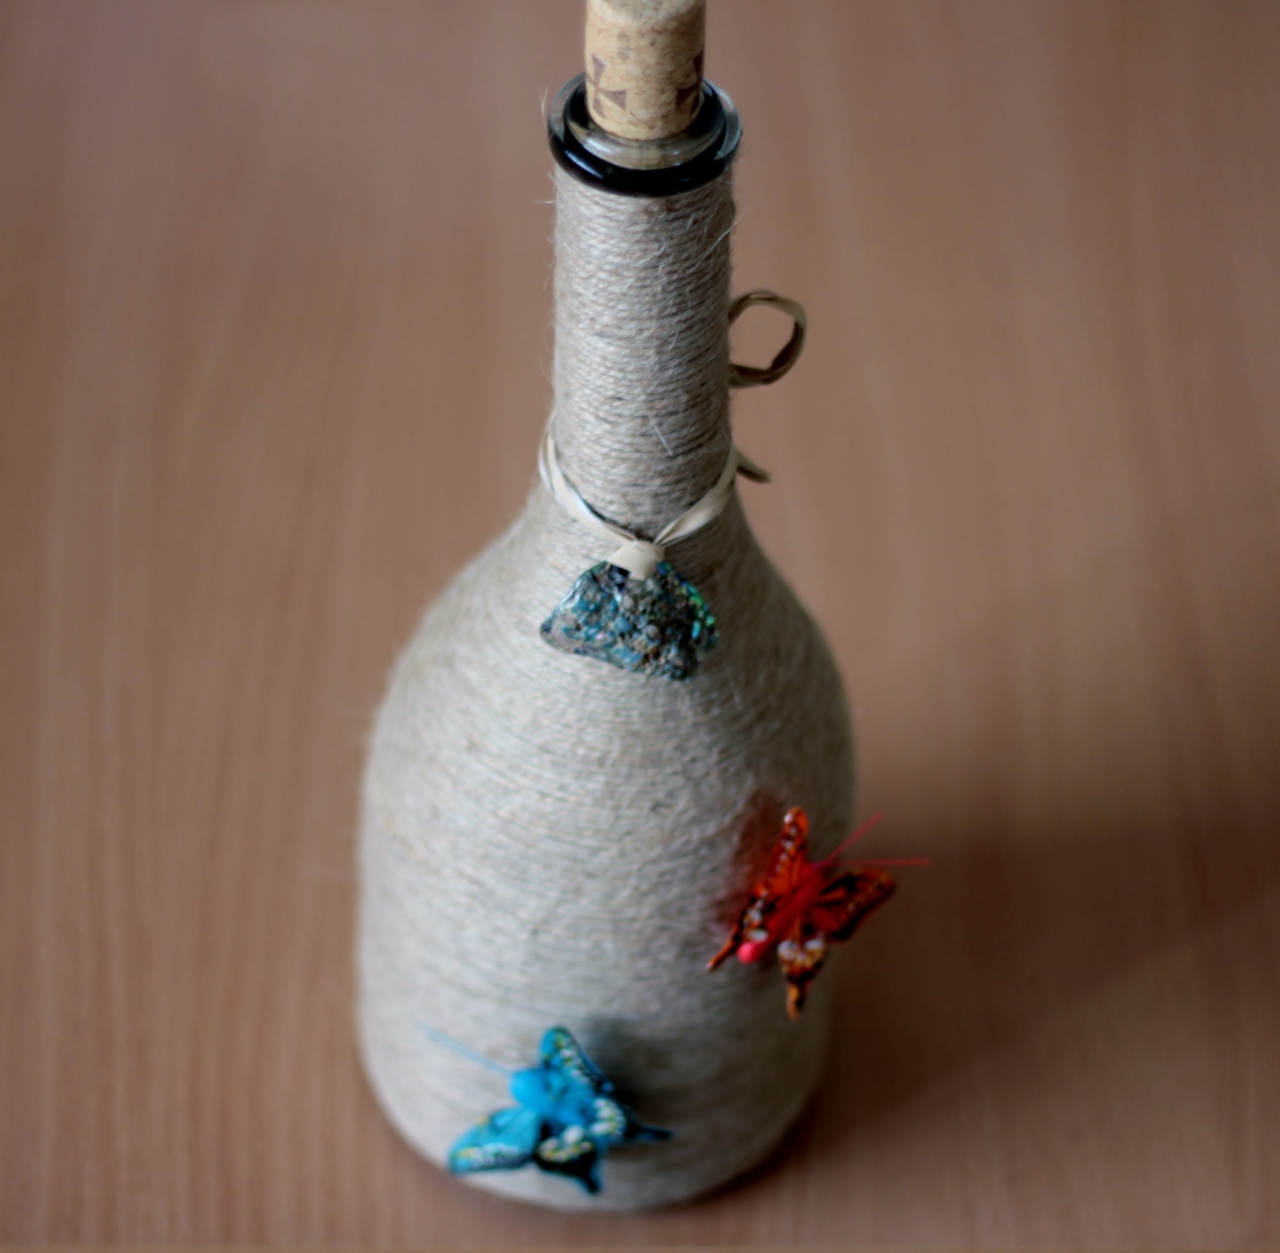 Decorated wine bottles - strings